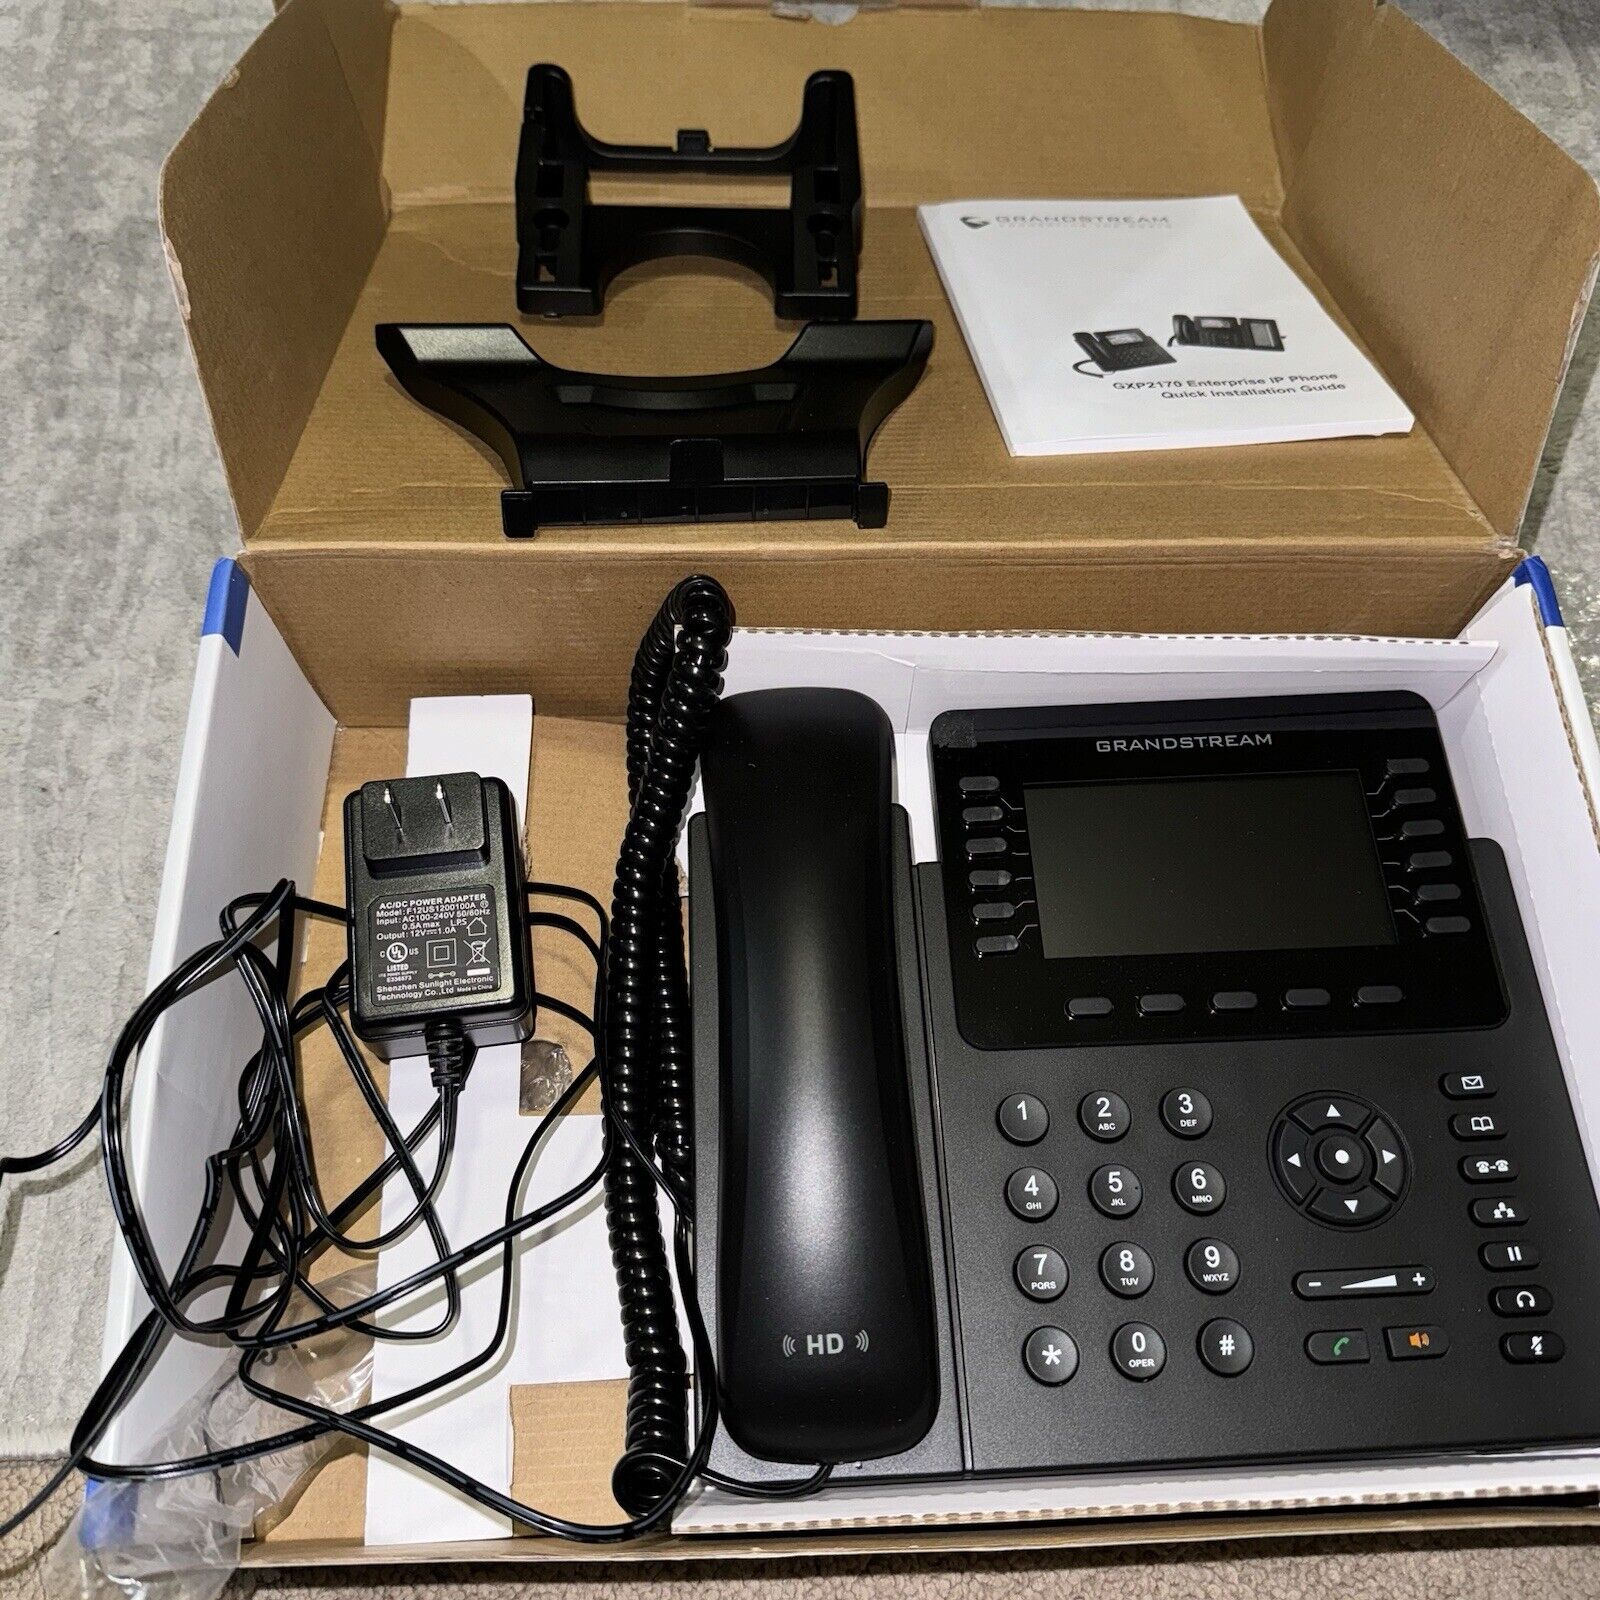 Grandstream GS-GXP2170 VoIP Phone & Device Includes Power Chord - EUC Great